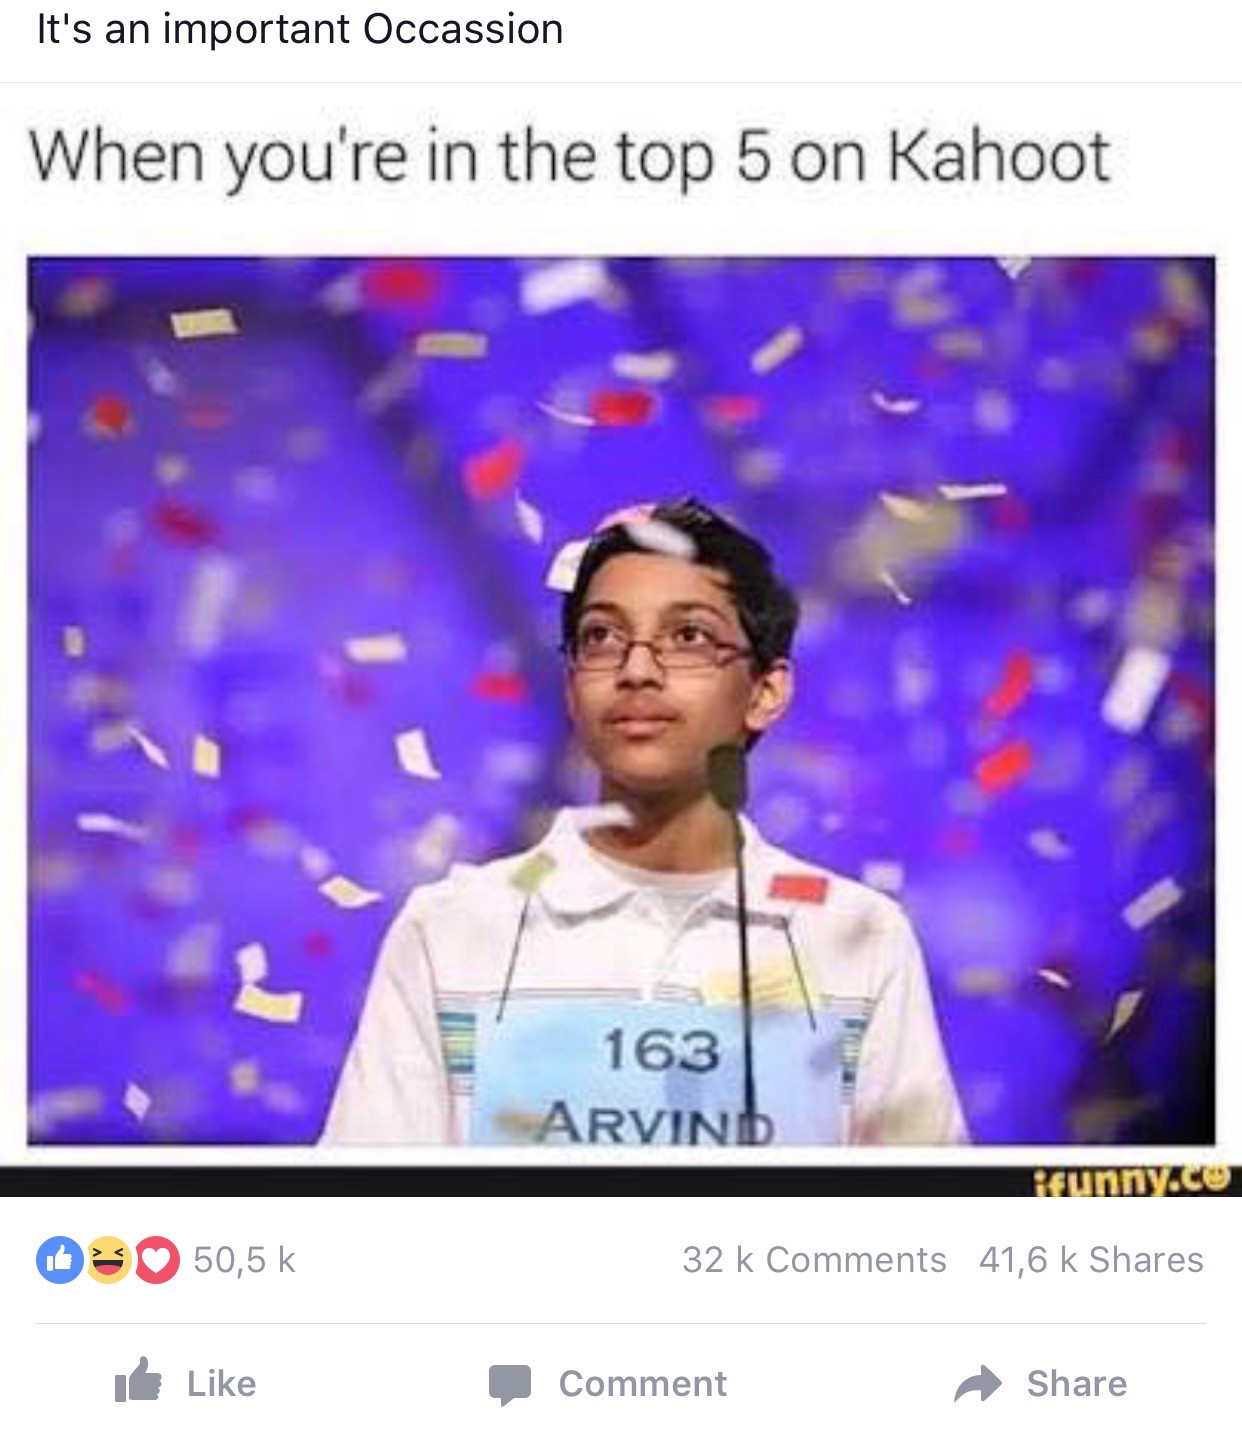 Kahoot meme - you re in the top 5 It's an important Occassion When you're in the top 5 on Kahoot 163 Arvind funny.co O 50,5 k 32 k 41,6 k it Comment